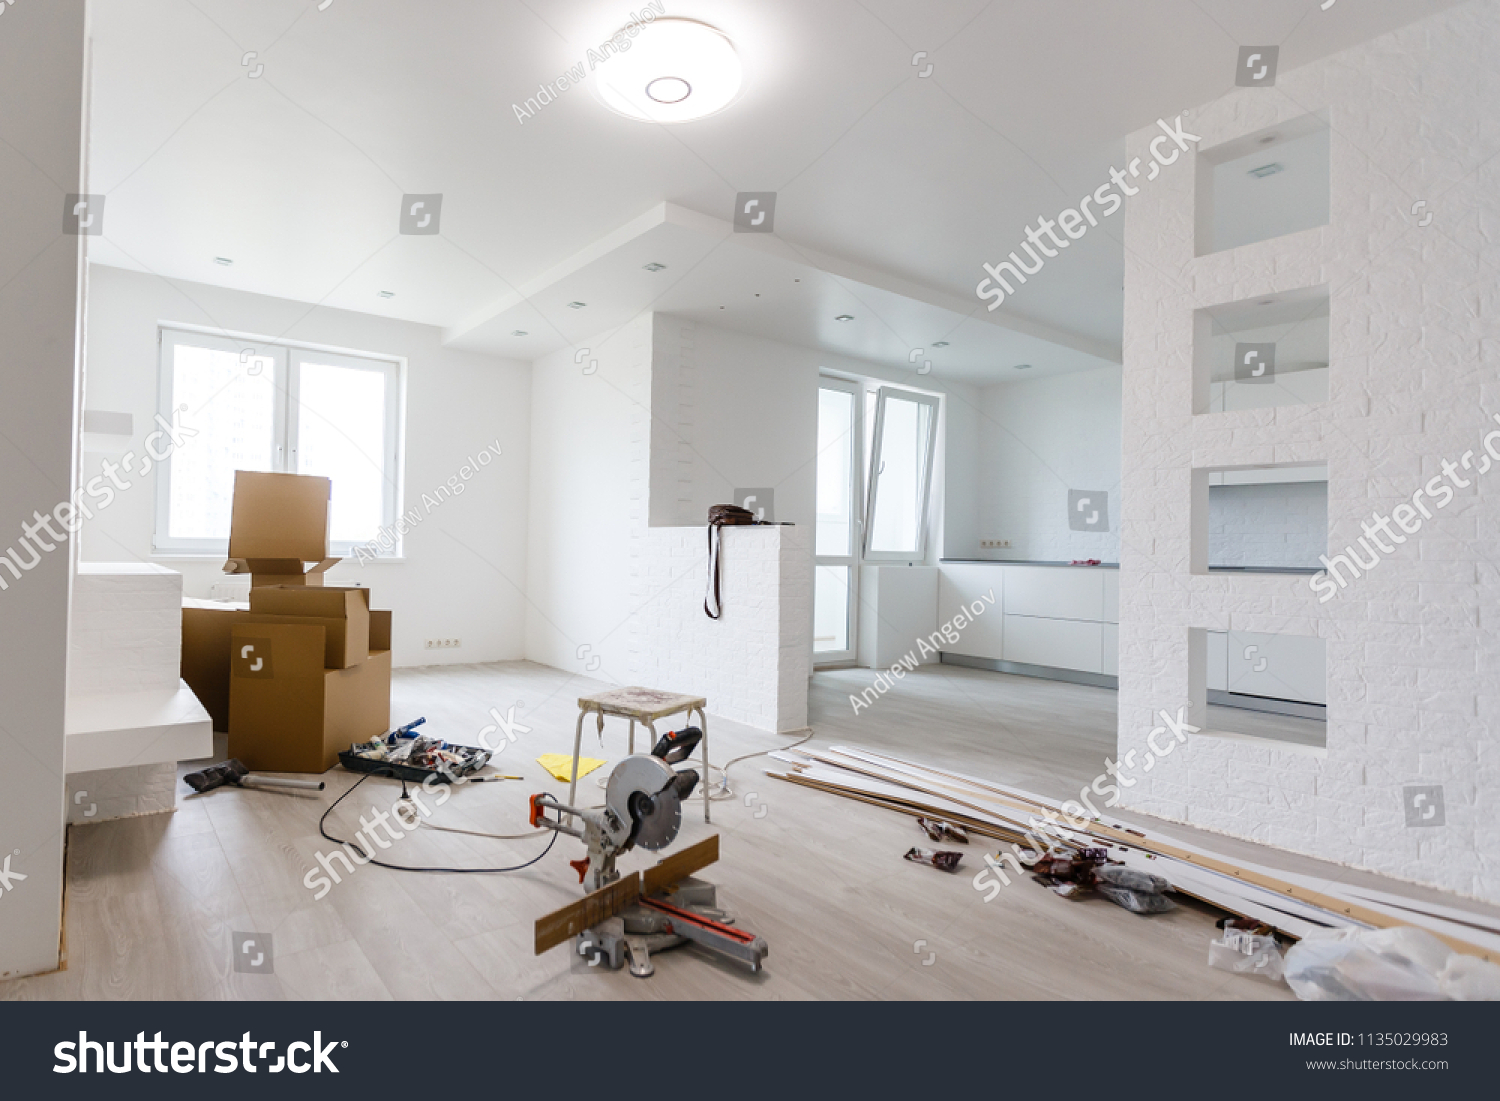 Stock Photo Interior Of Apartment With Materials During On The Renovation And Construction Remodel Wall From 1135029983 